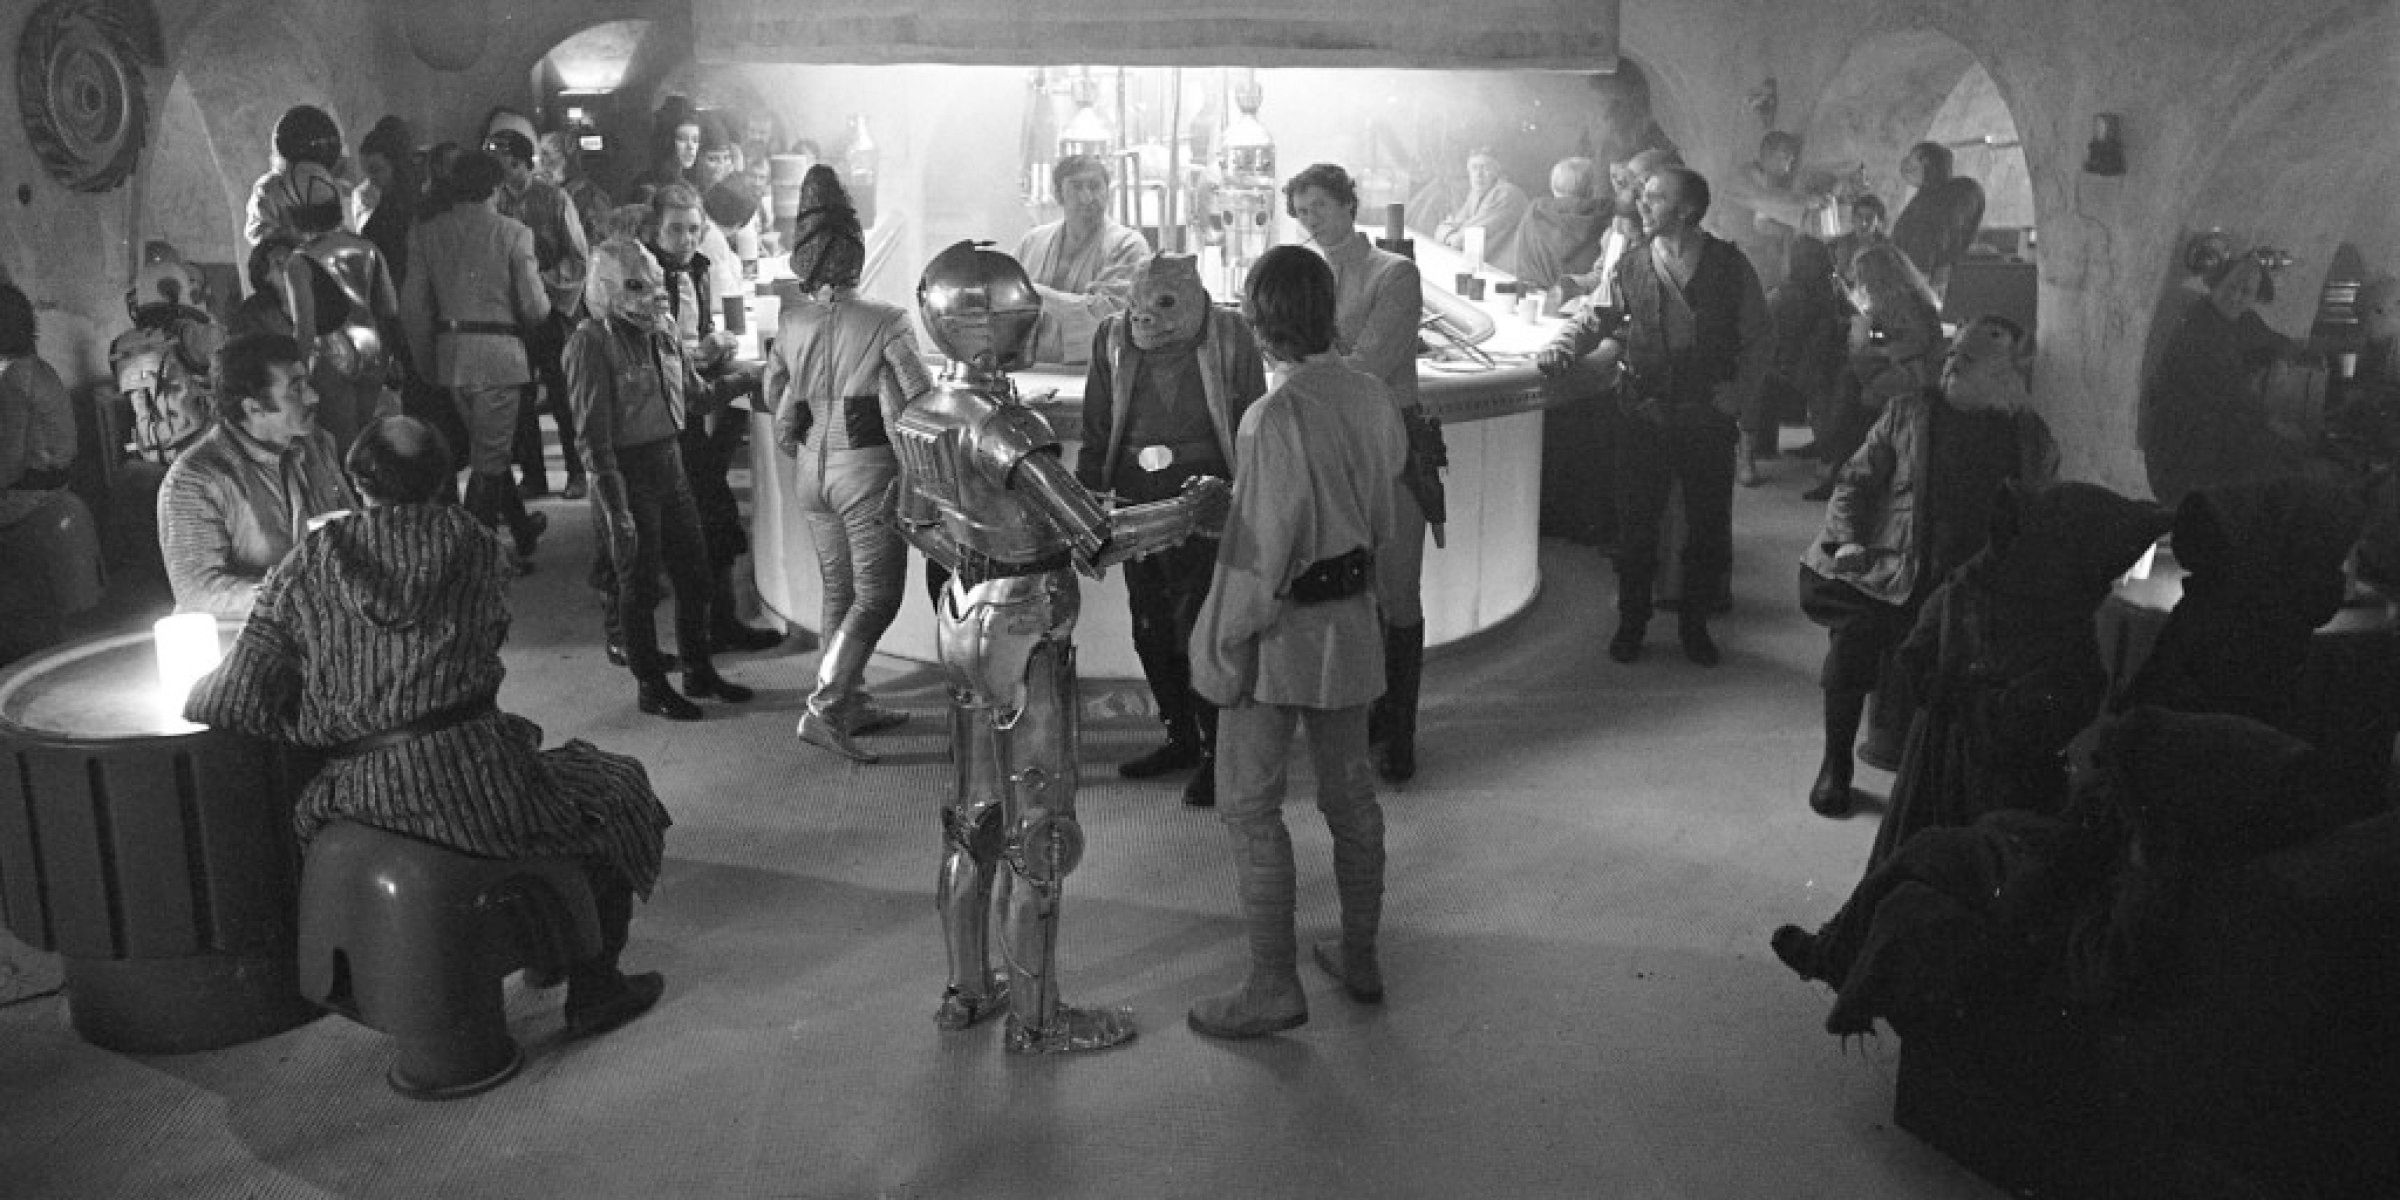 Star Wars Behind the Scenes of Mos Eisley Cantina